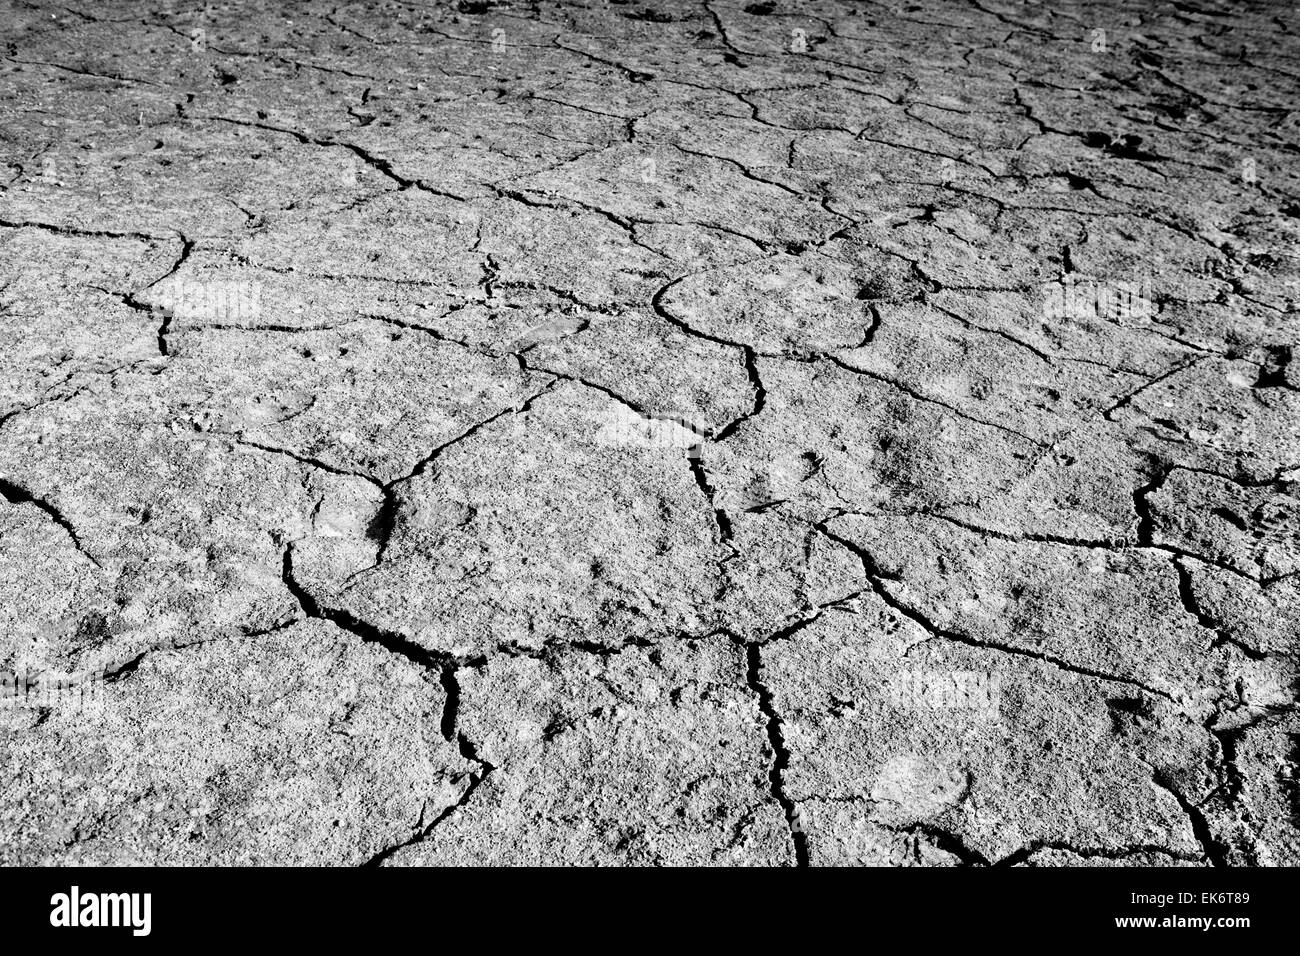 Dry cracked earth texture or background, Nogales reservoir, Badajoz, Spain Stock Photo